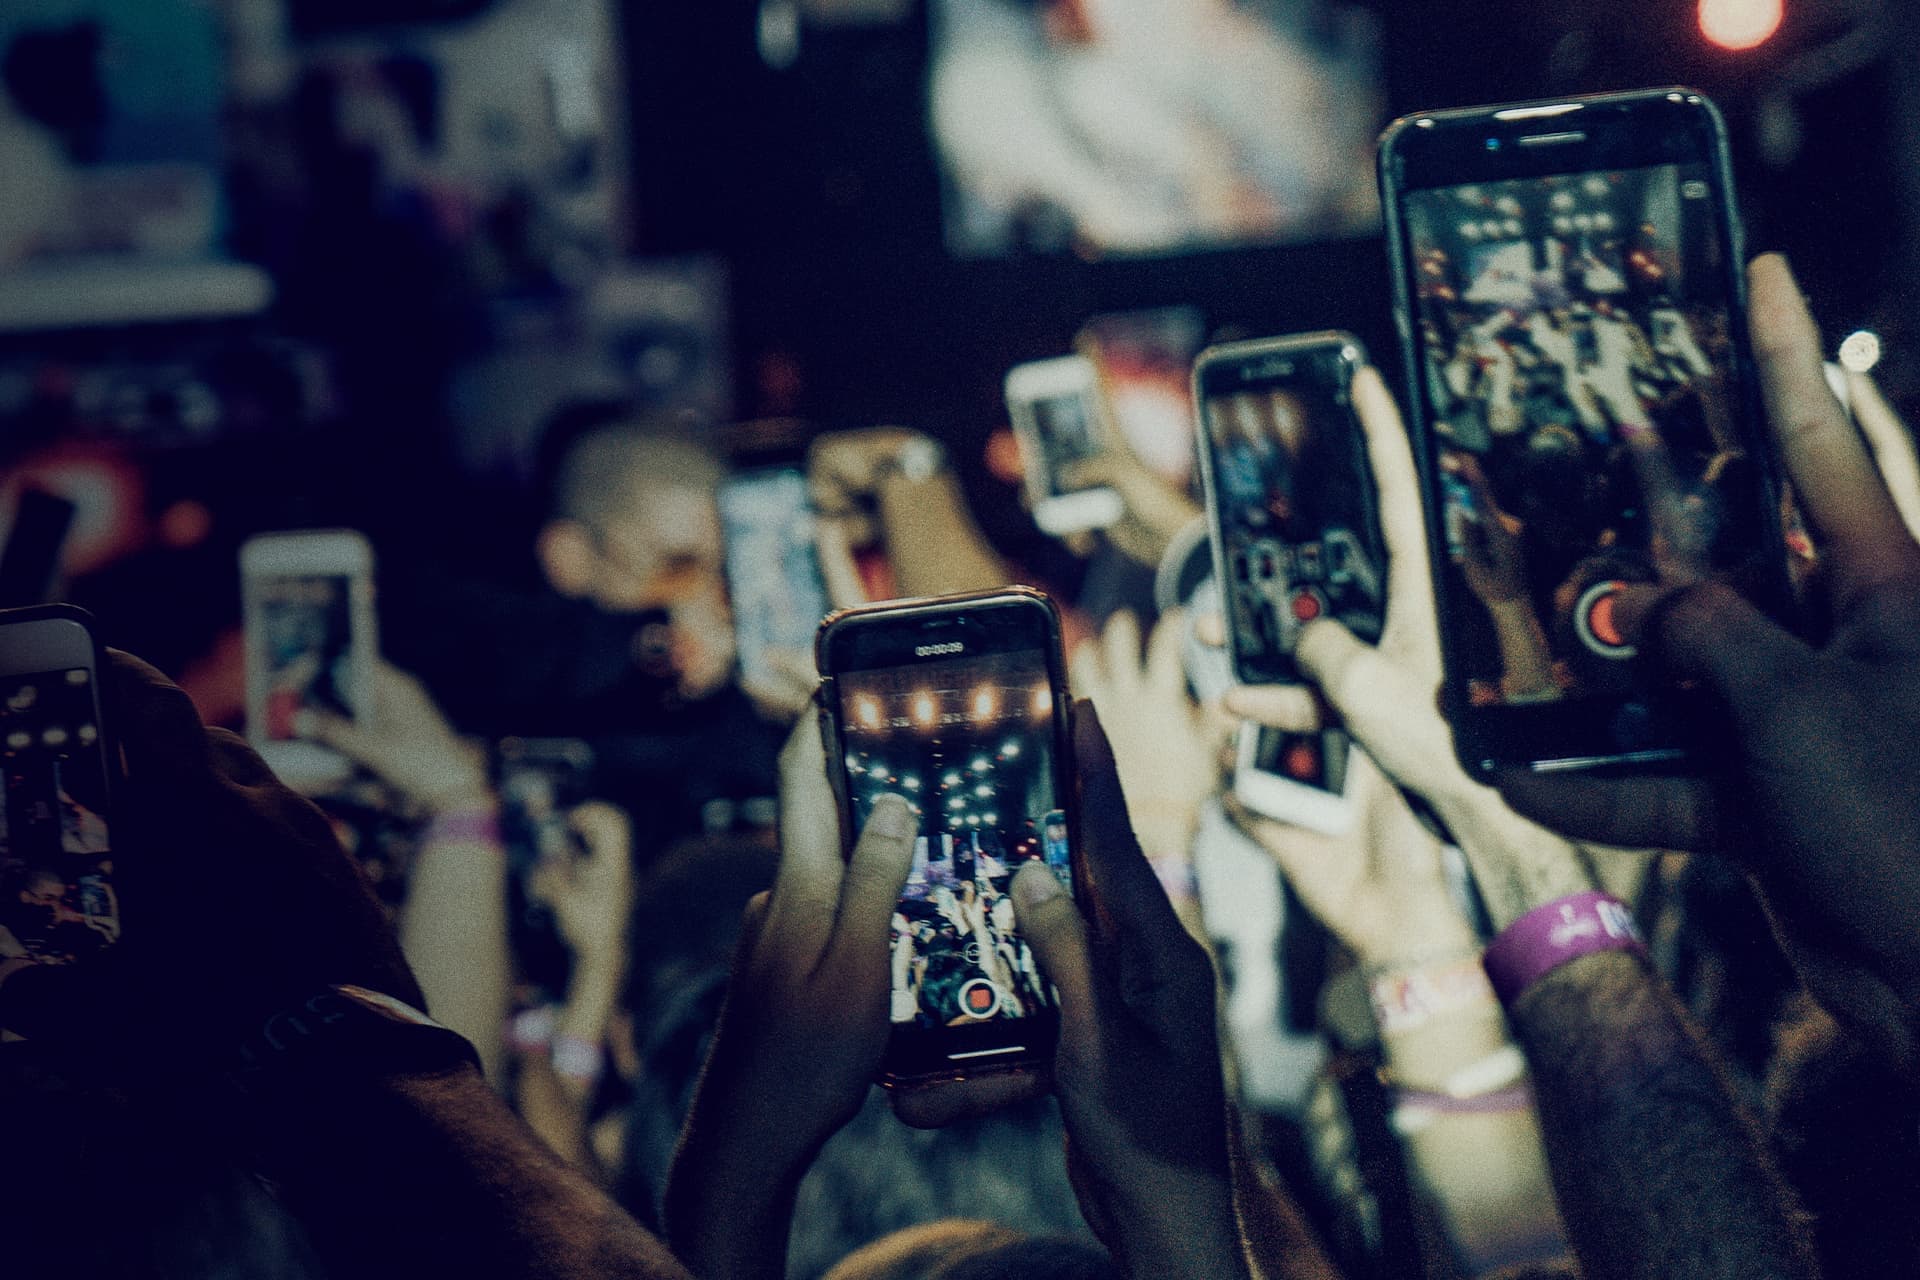 Crowd with phones